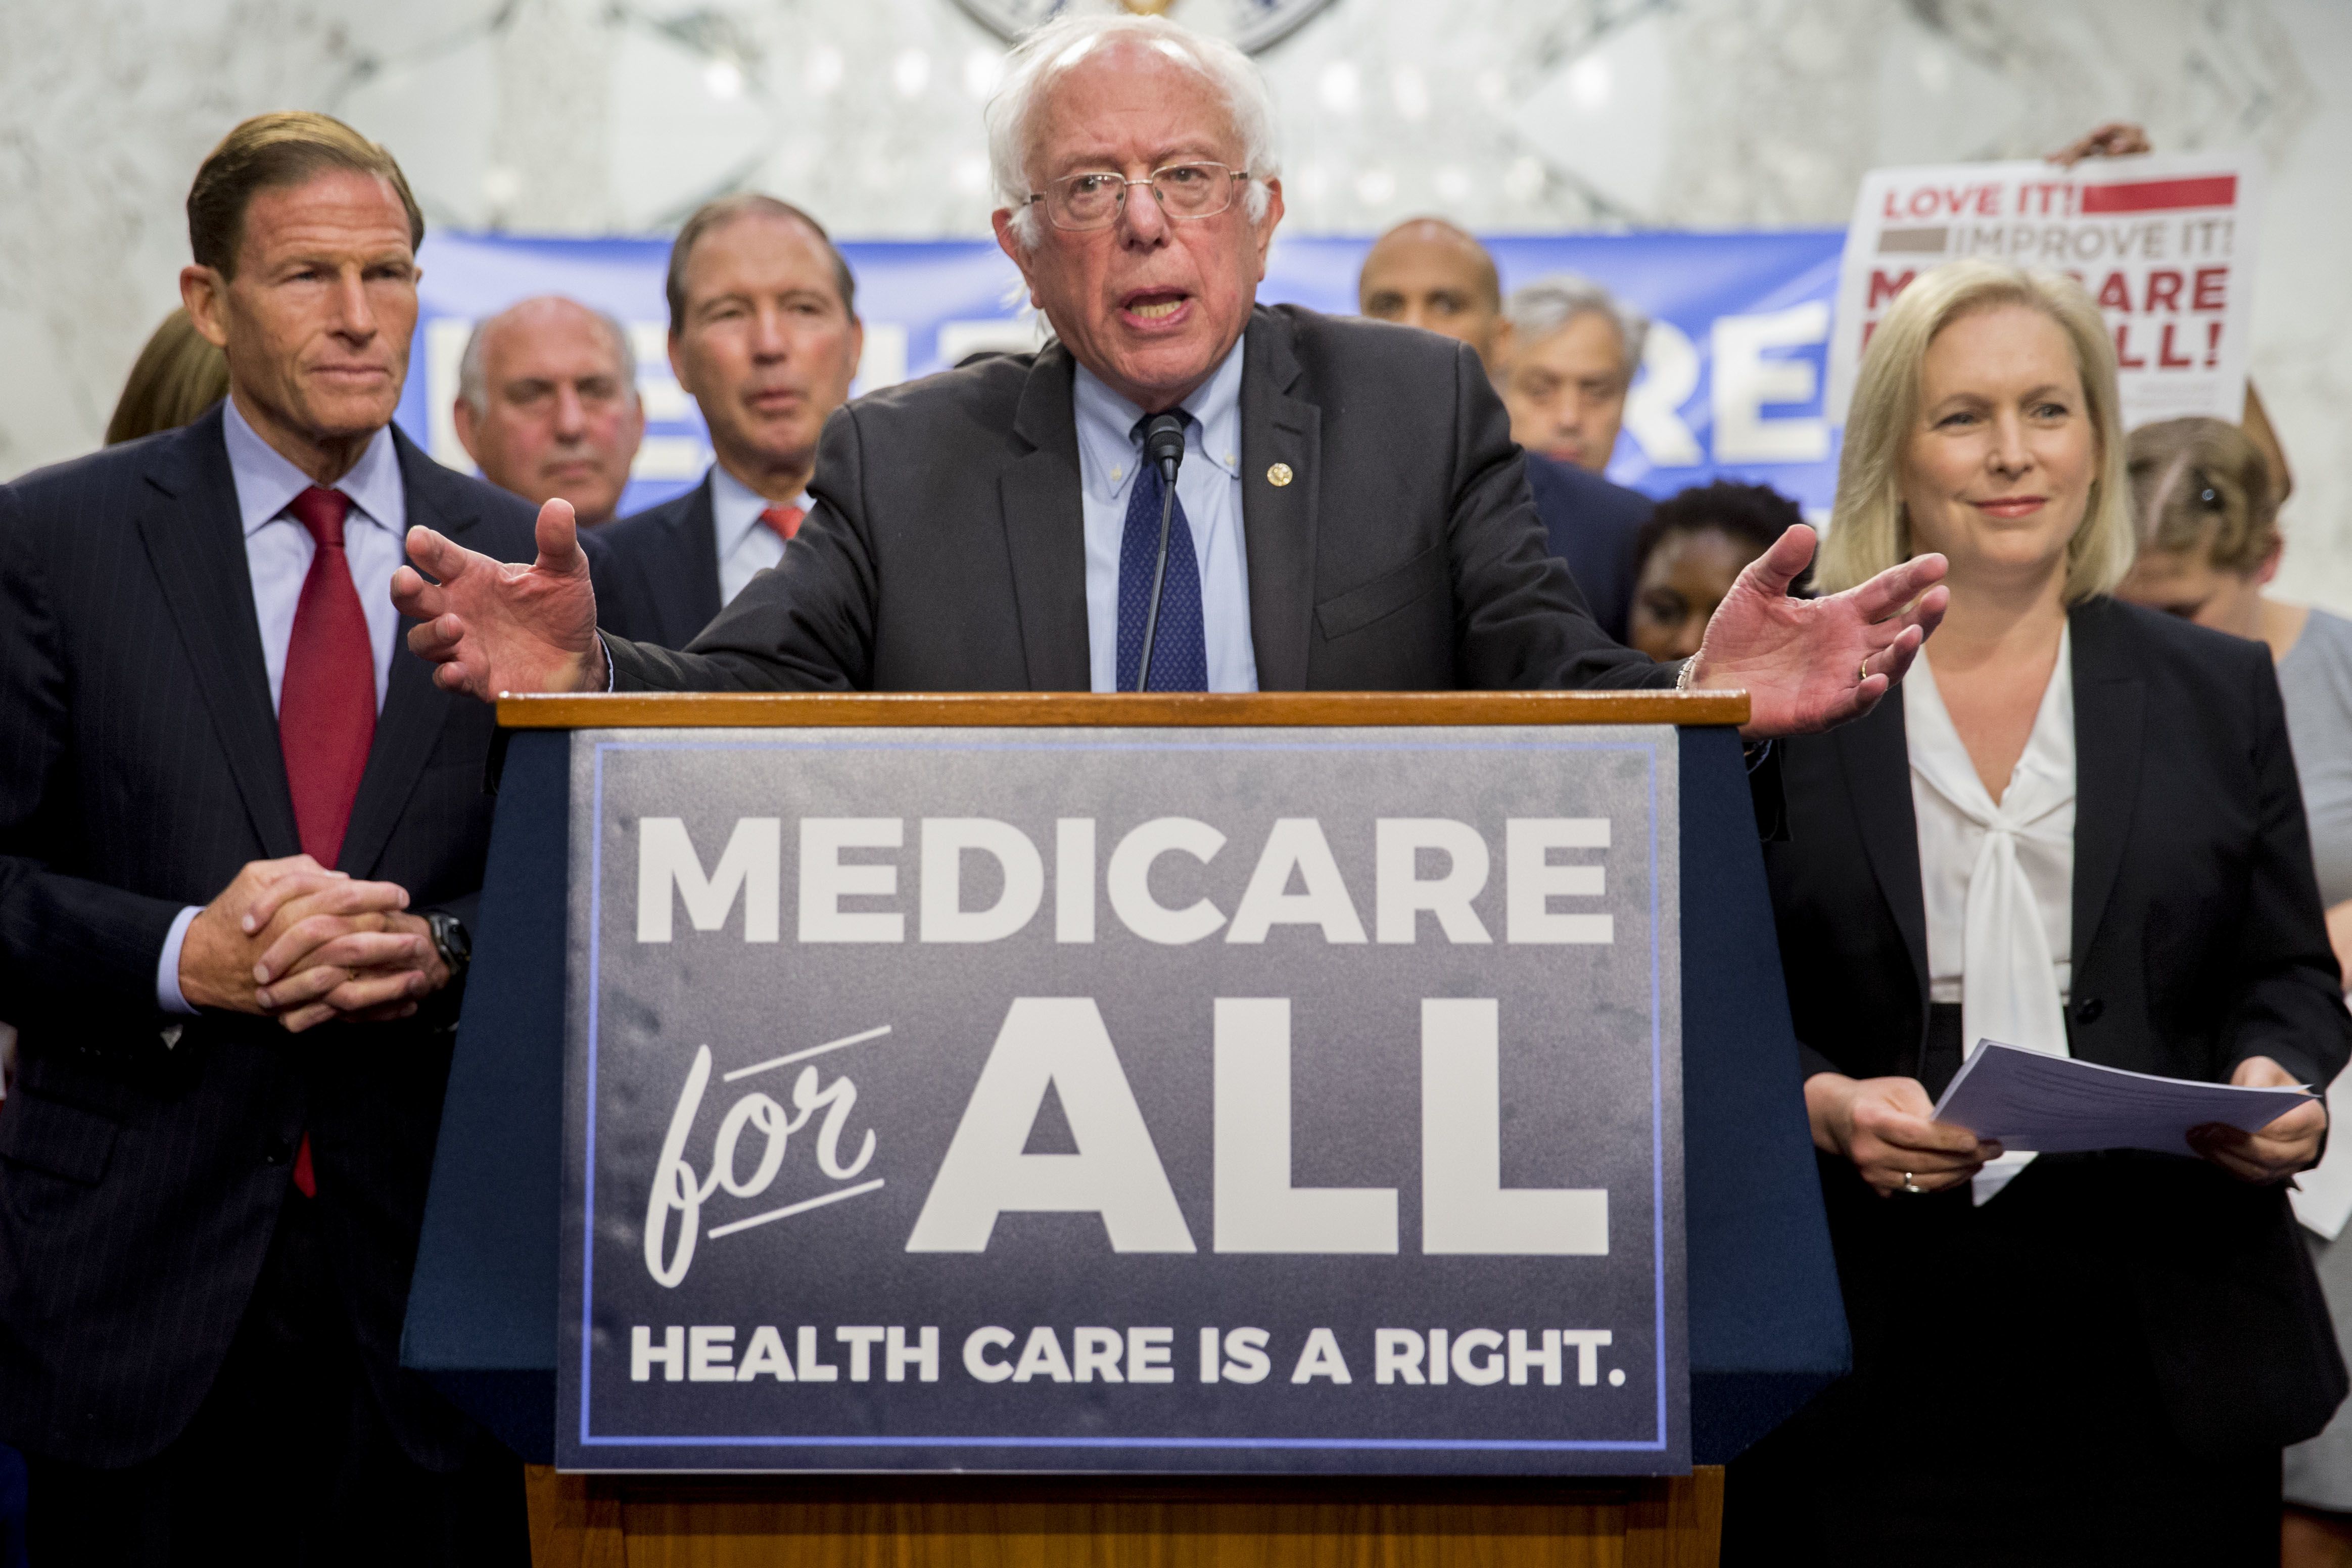 Another big private insurer just weighed in on 'Medicare for All'